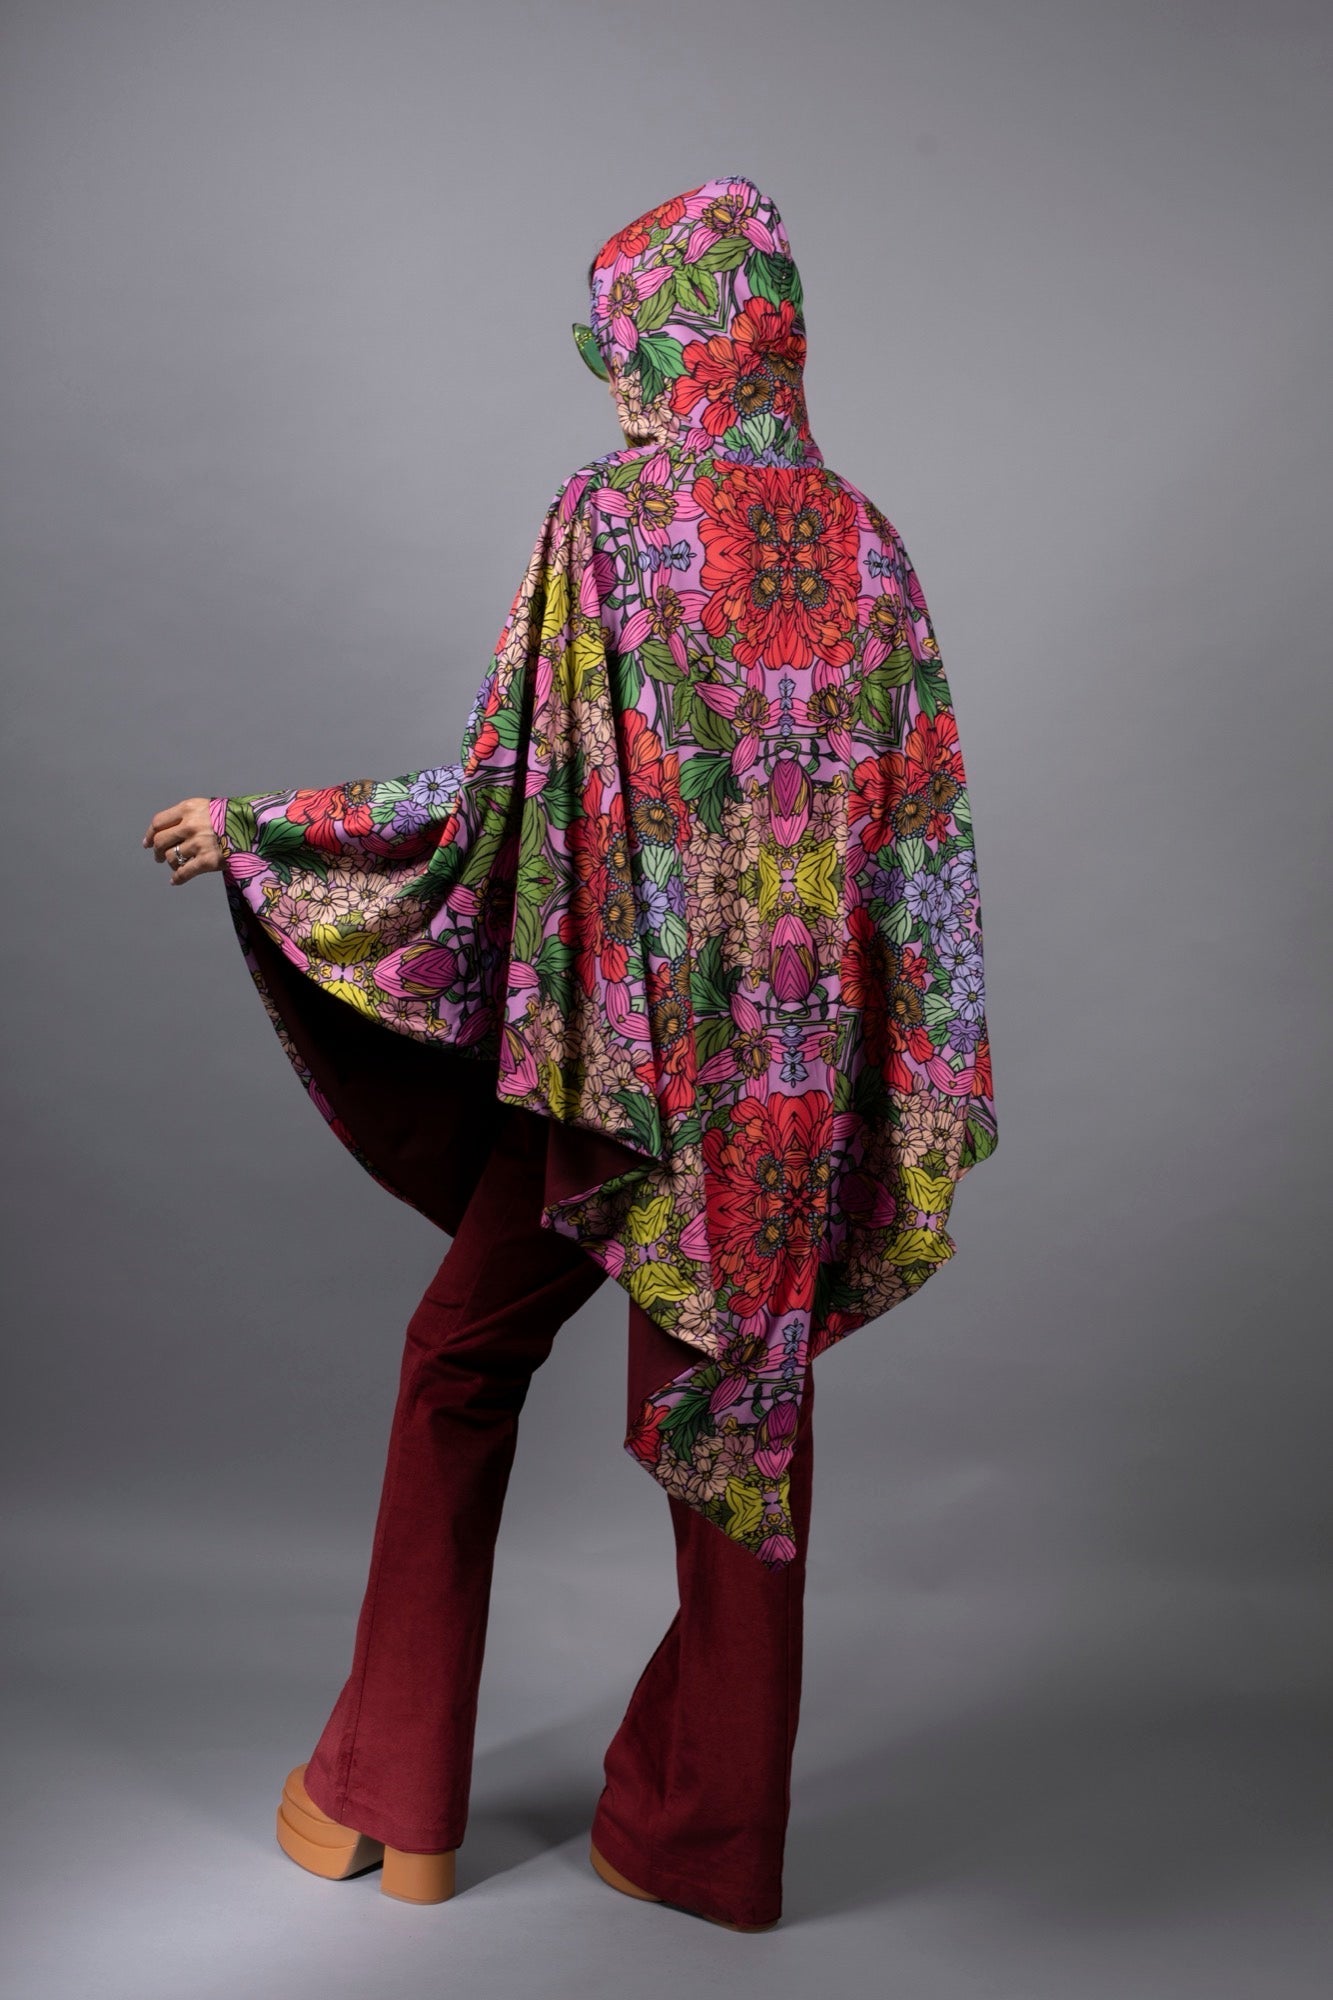 Mystic Red Garden floral hooded cloak cape